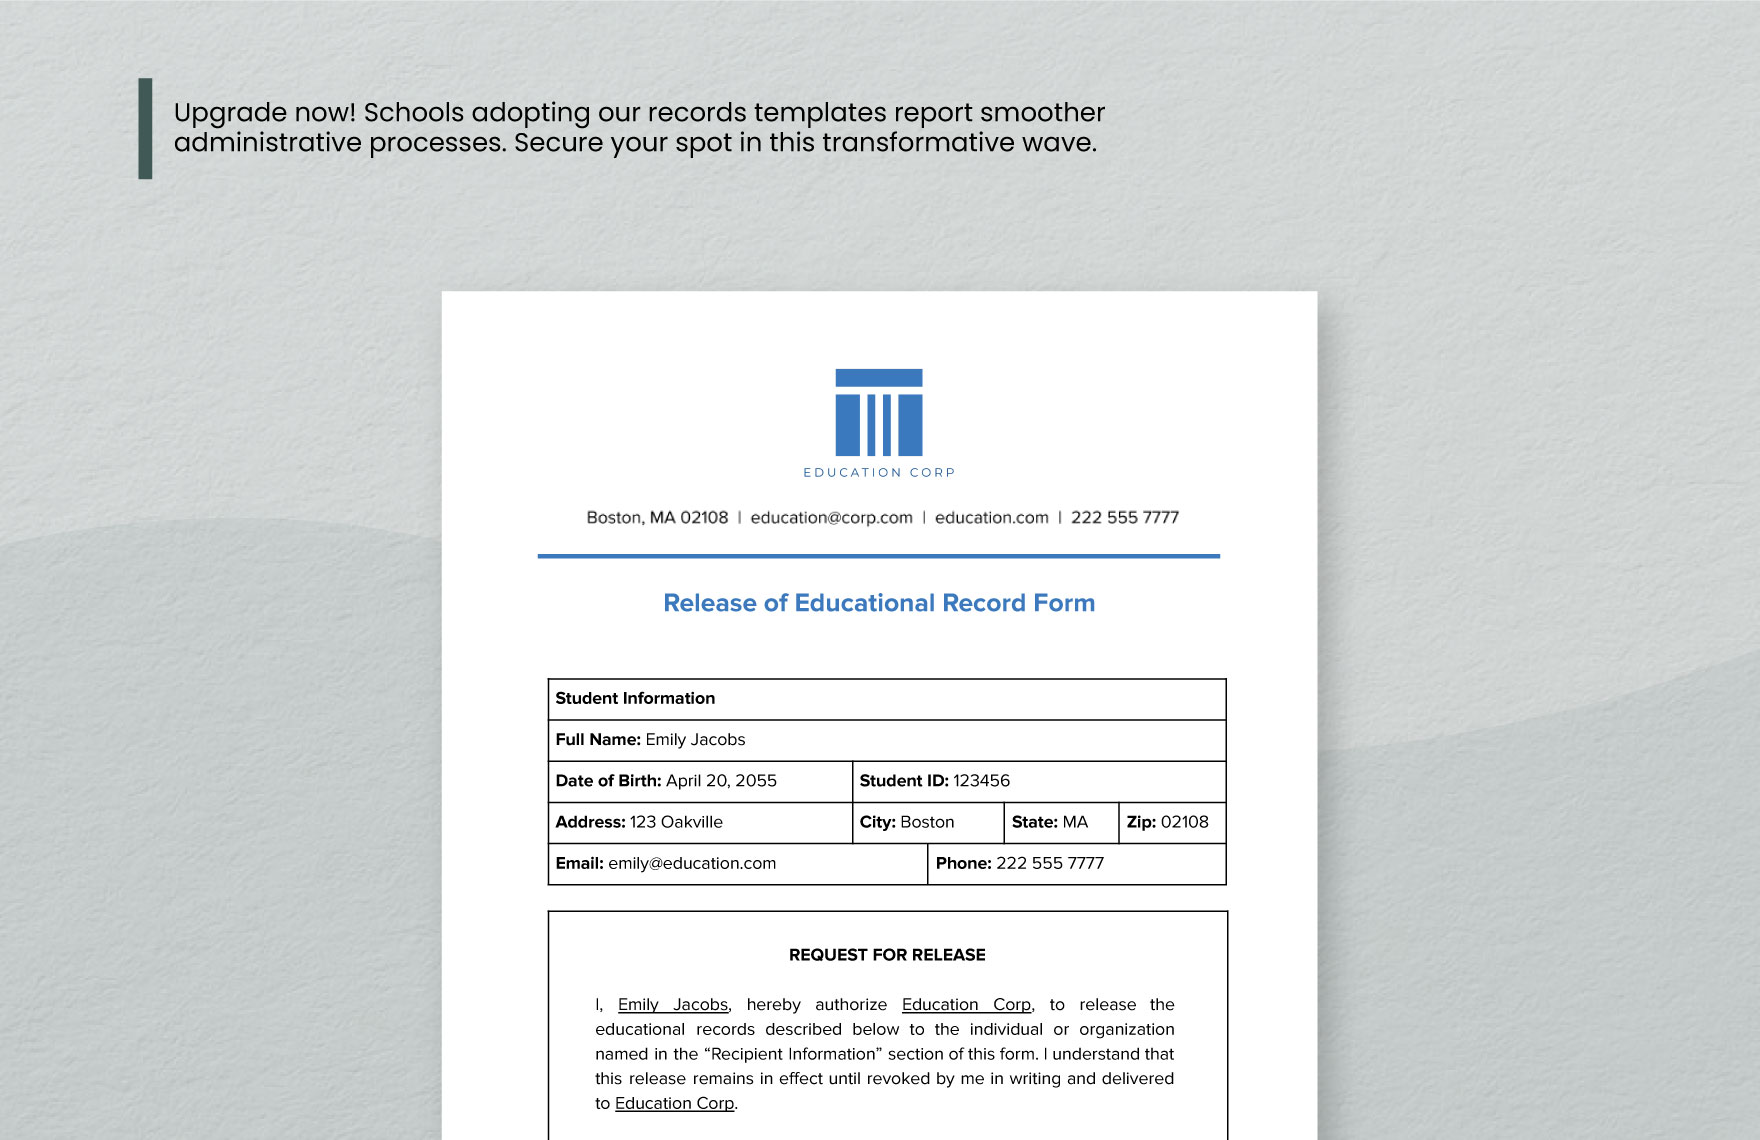 Release of Educational Record Form Template